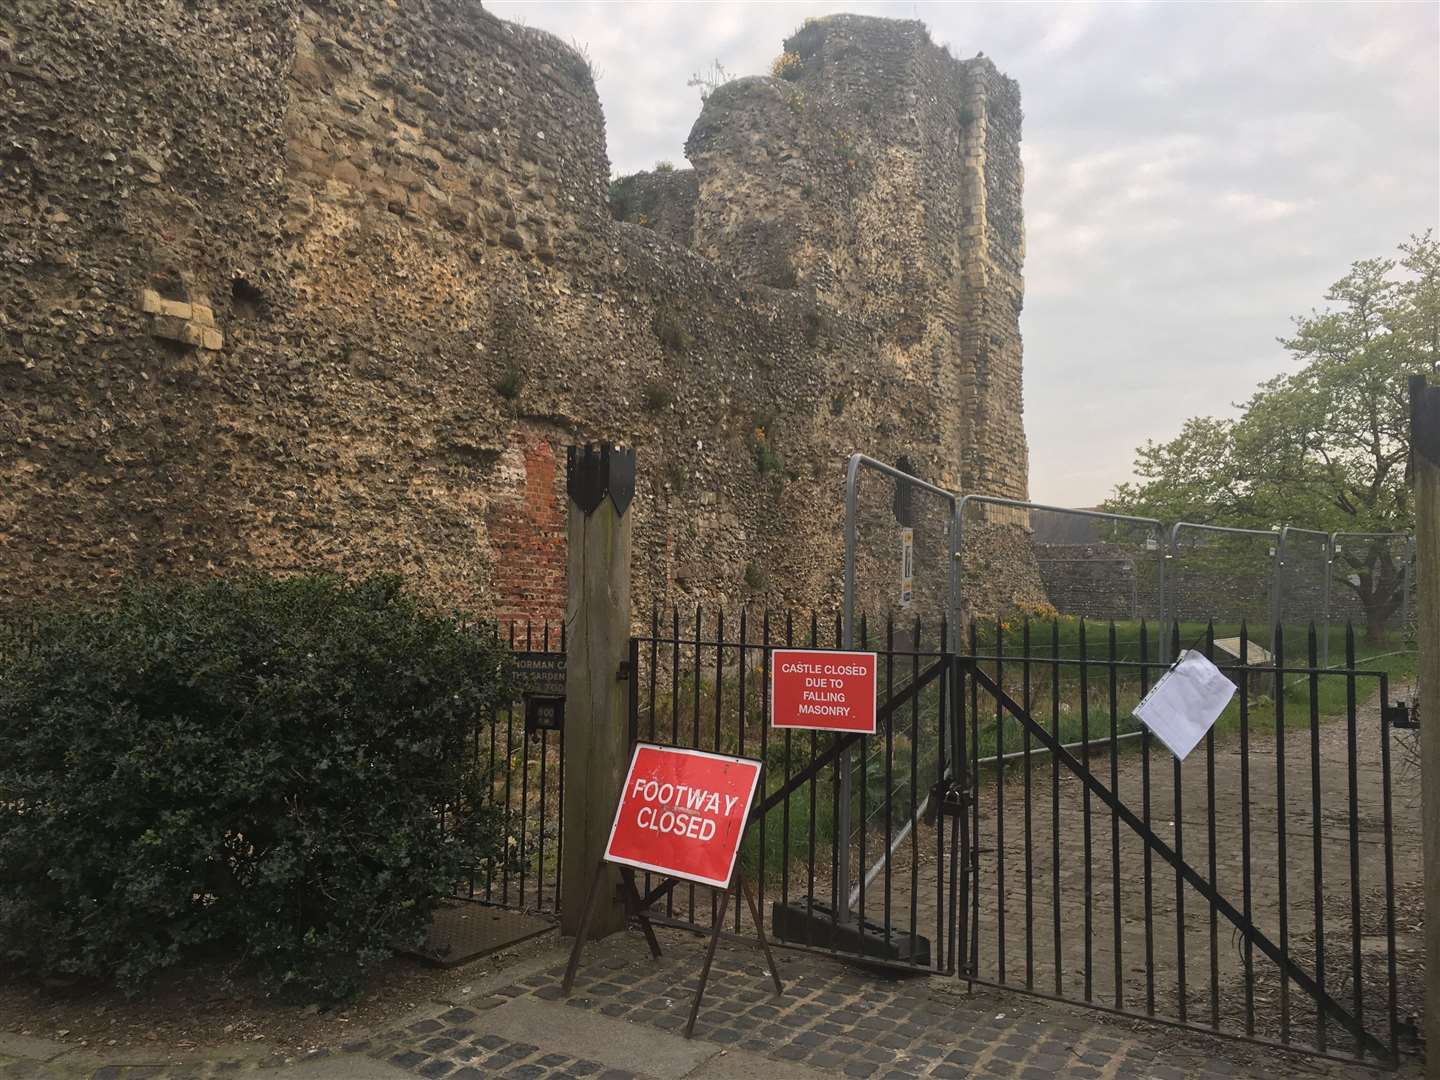 The neighbouring castle remains closed